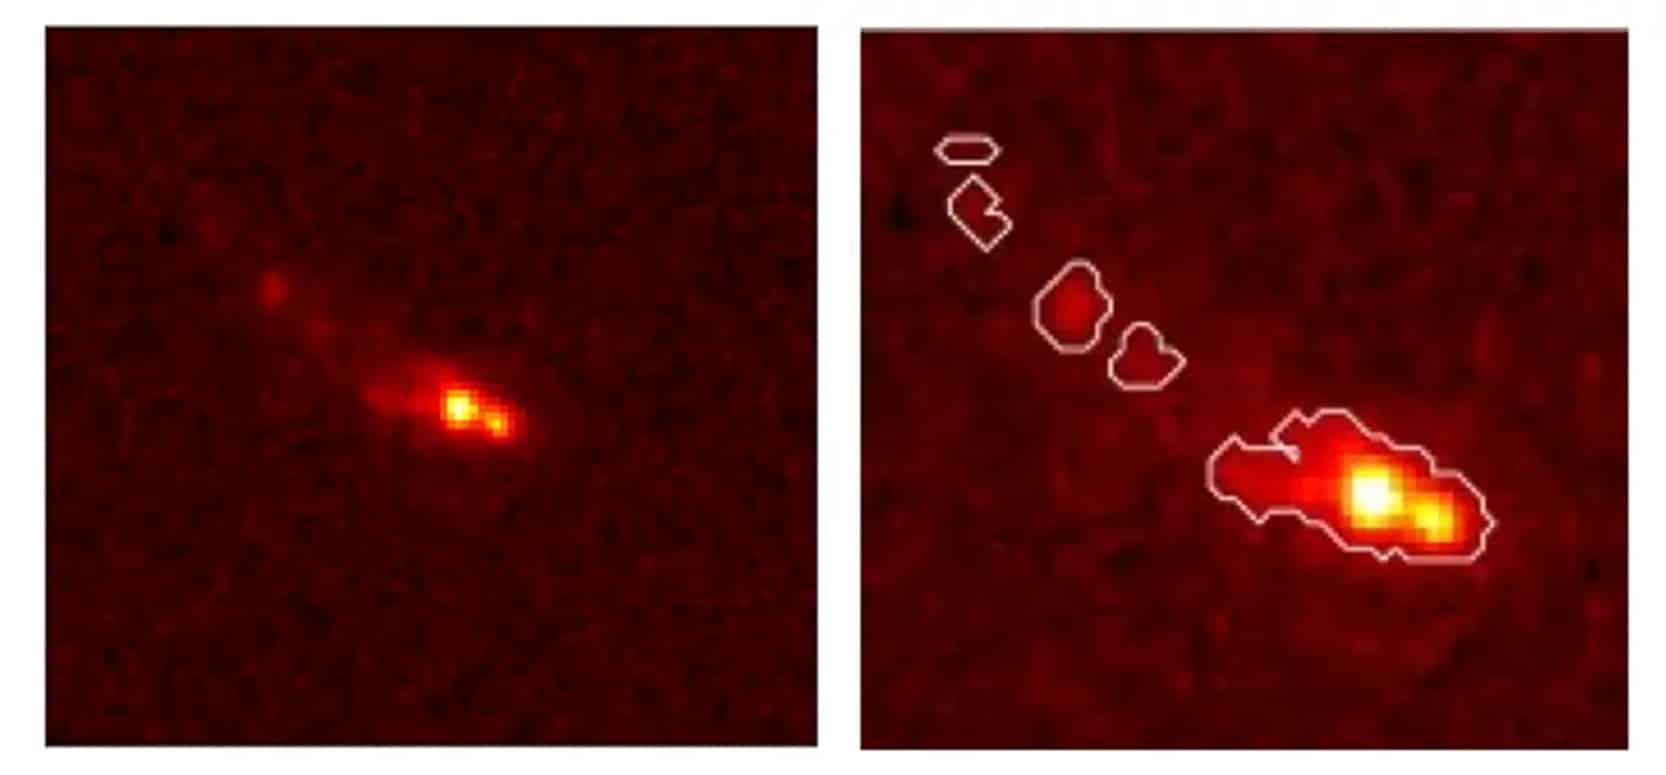 Scientists unprecedentedly detailed observations of one of the earliest known galaxies thumbnail